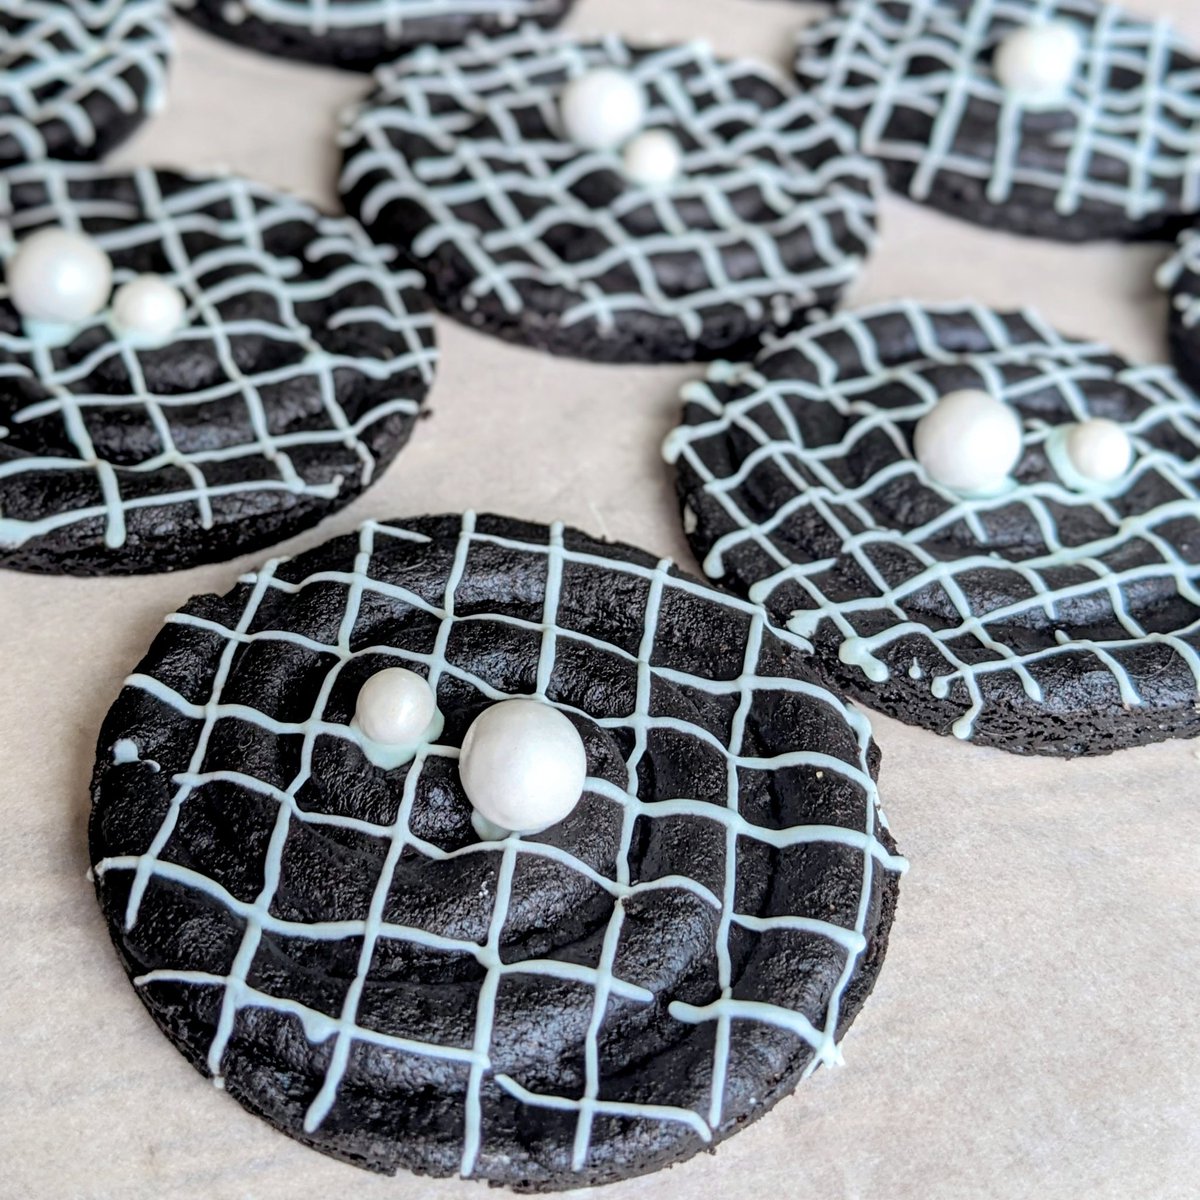 Made some cookies to celebrate the @NANOGrav announcement! Fortunately you don't need pulsars to detect these #GravitationalWaves (a mouth works fine)